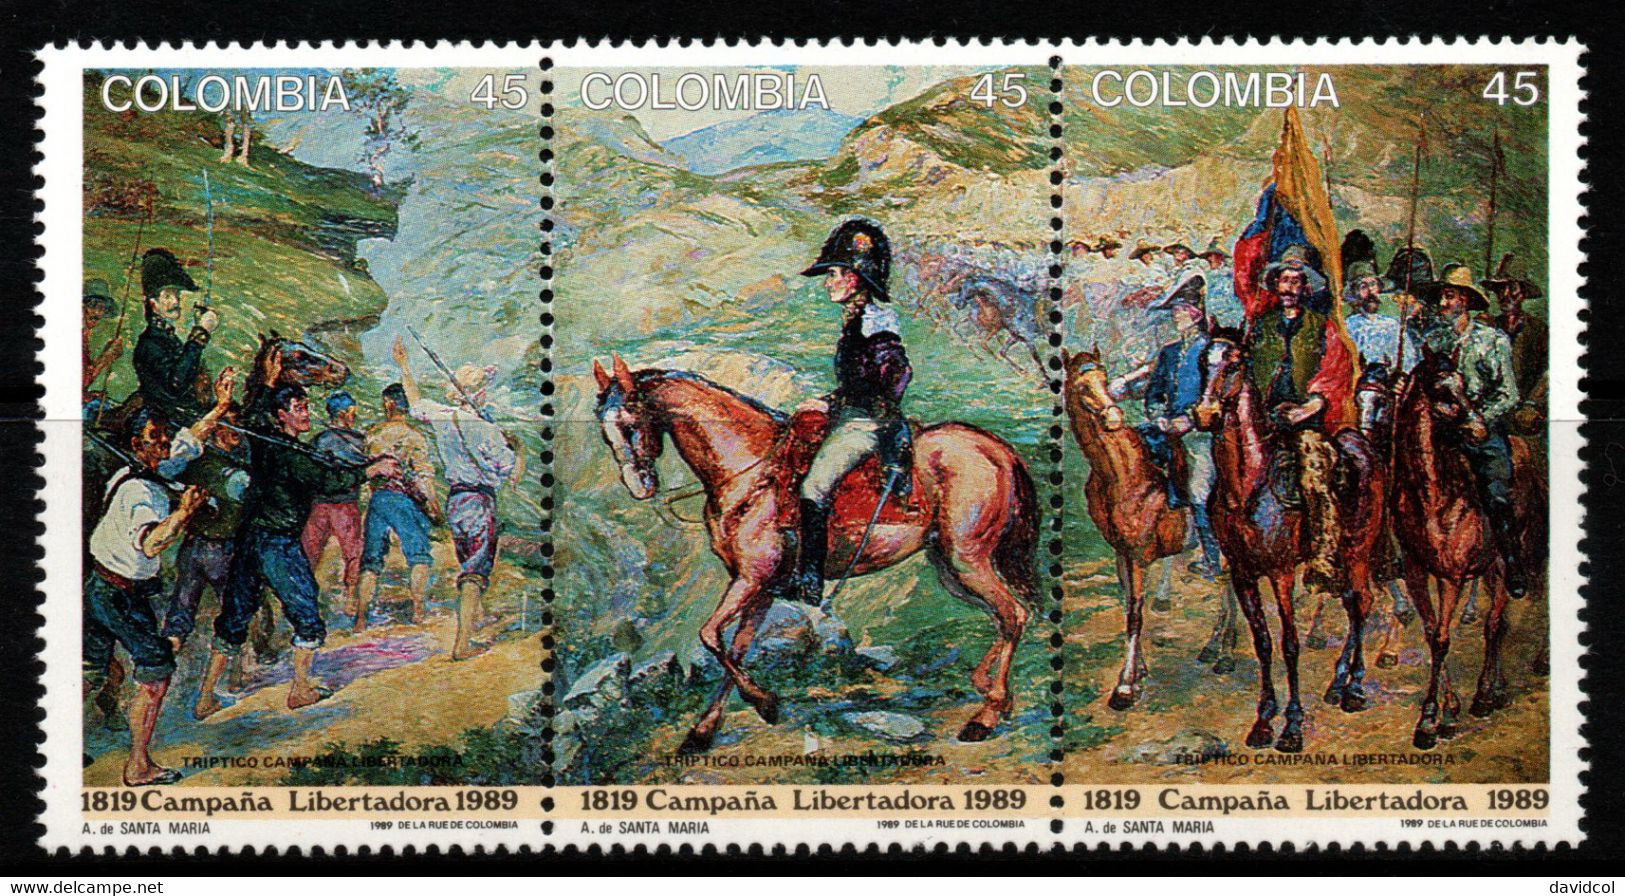 16A- KOLUMBIEN - 1989 - MI#:1766-1768 - MNH- 170 YEARS OF THE LIBERATION CAMPAIGN - Colombie